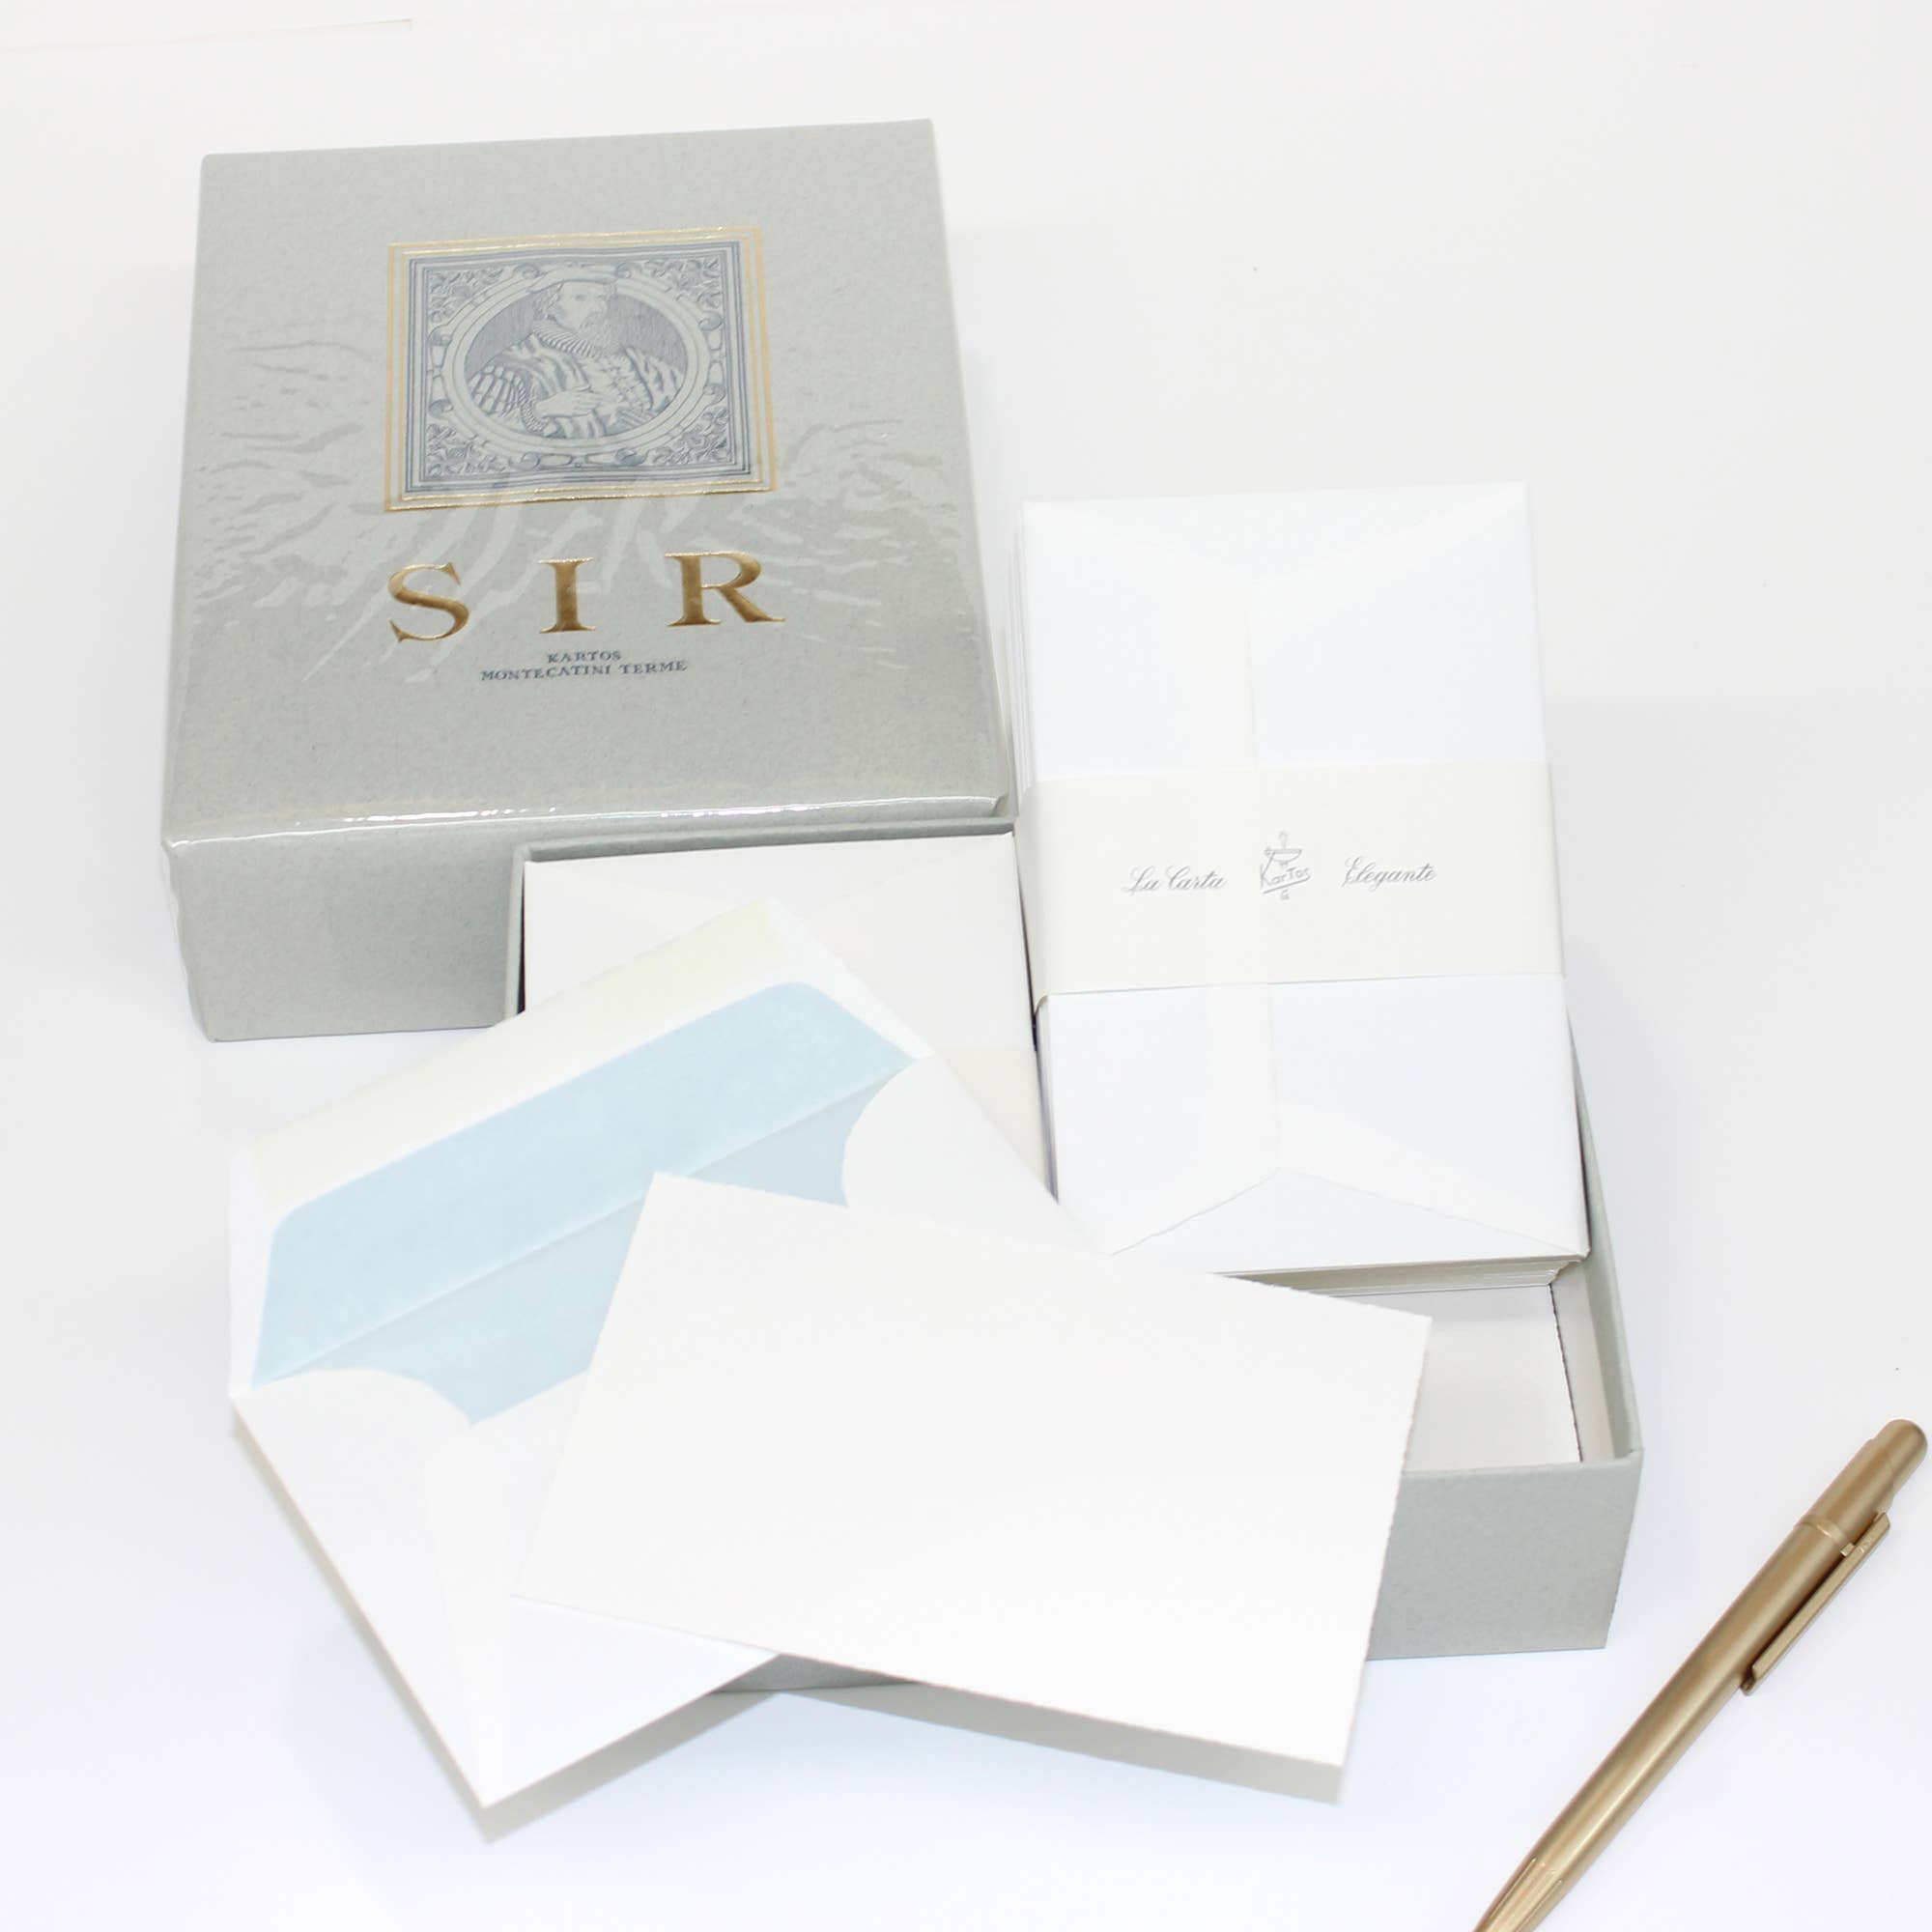 Kartos "SIR" Collection Deckled-Edge Cards, Stationery